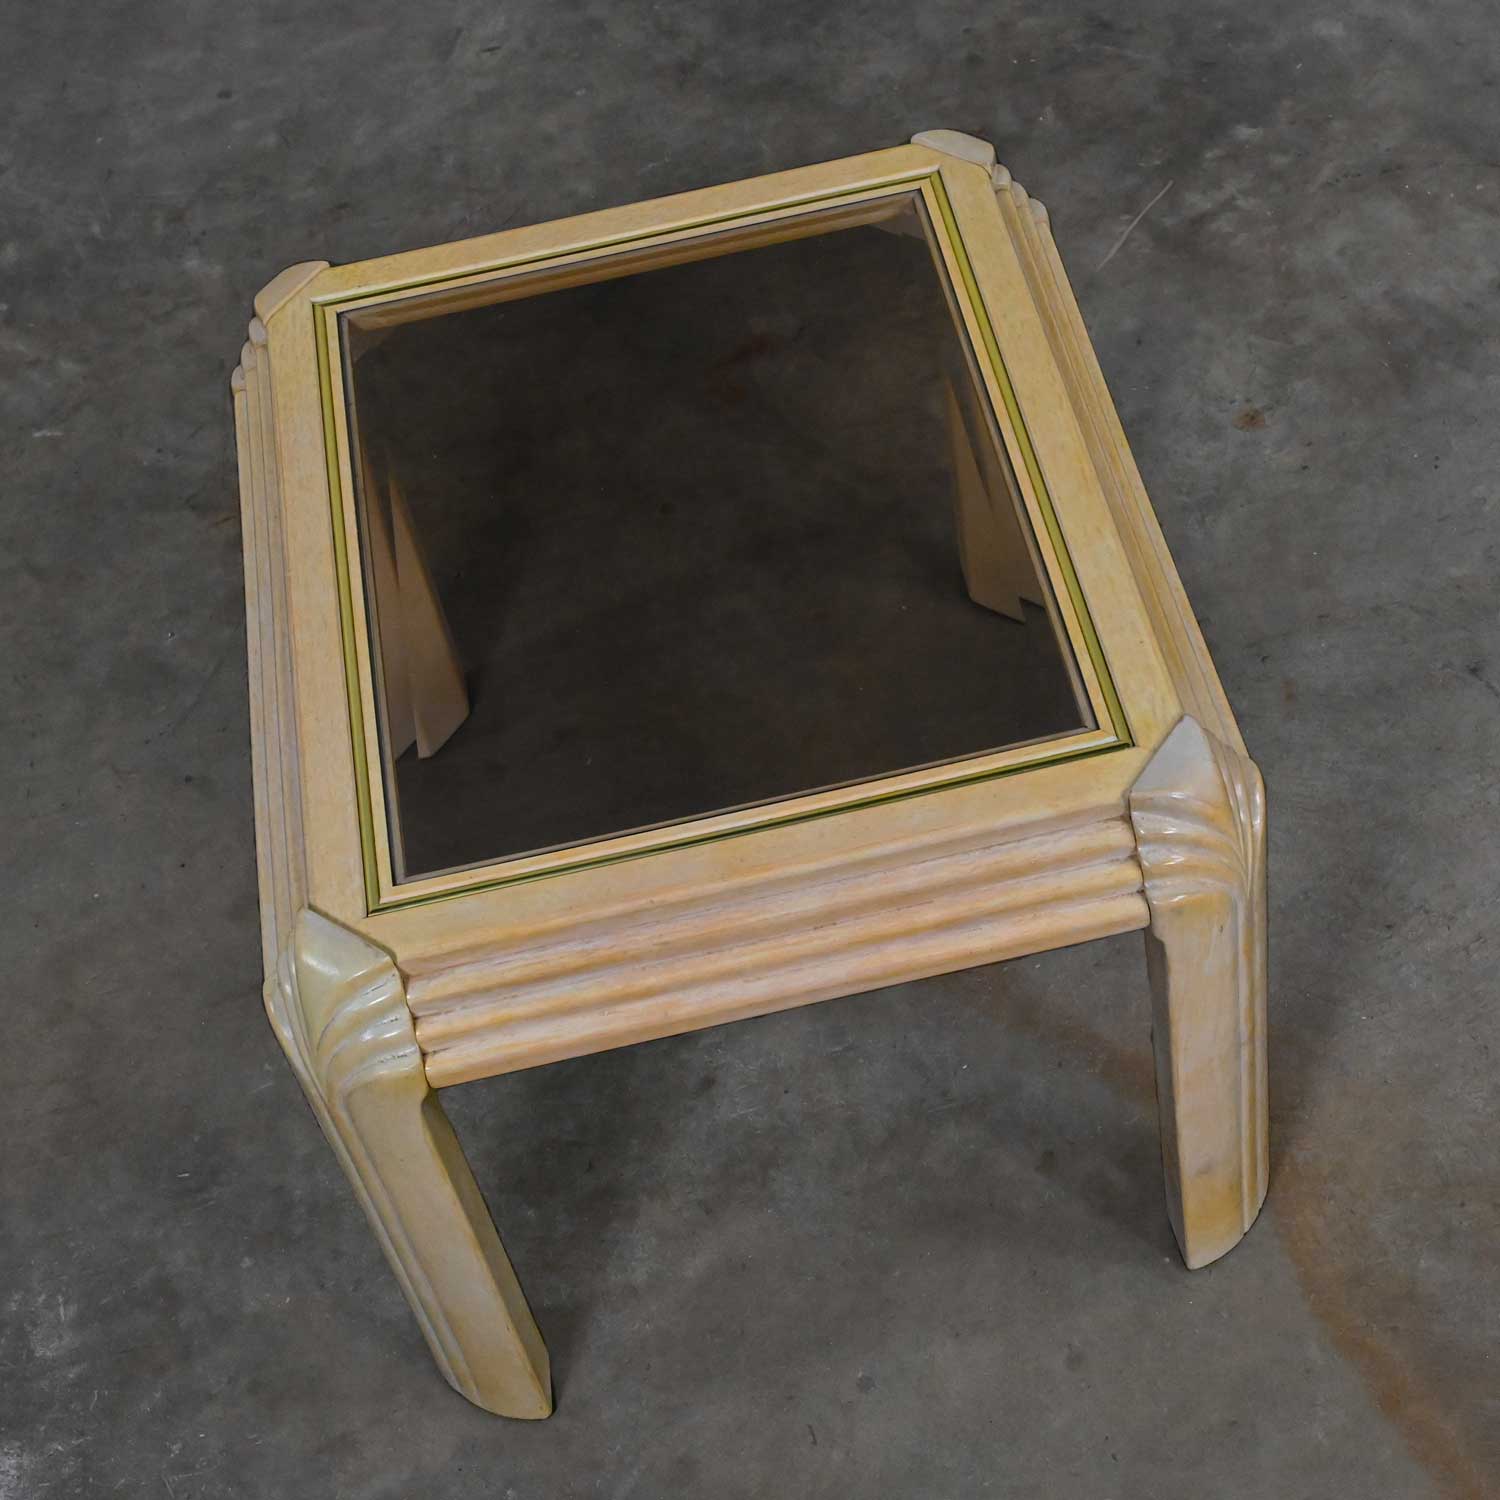 Late 20th Century Art Deco Revival Antique White Cerused Oak Finished End Table Smoked Glass Insert